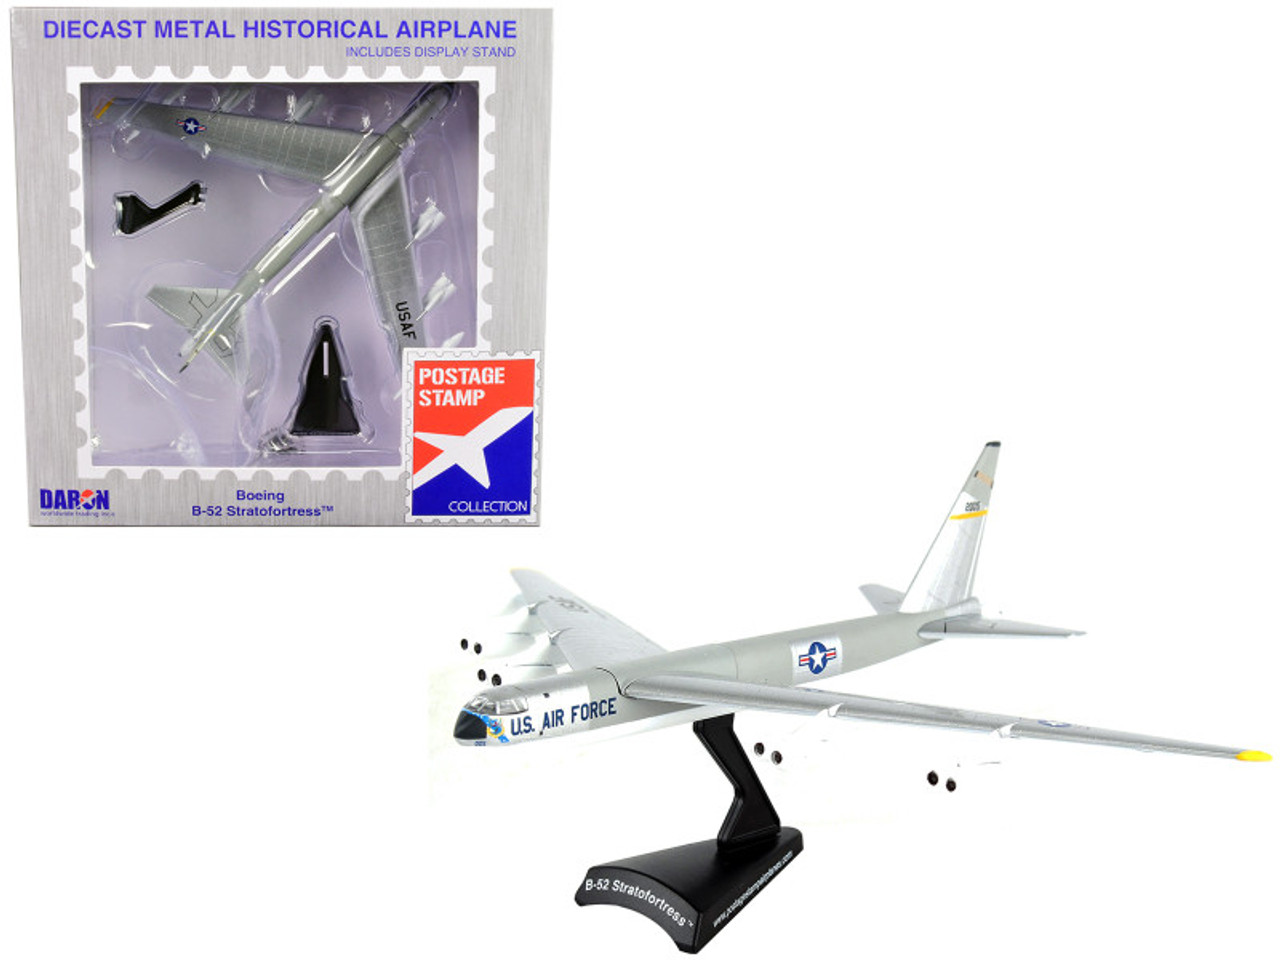 Boeing B-52 Stratofortress Bomber Aircraft "United States Air Force" 1/300 Diecast Model Airplane by Postage Stamp